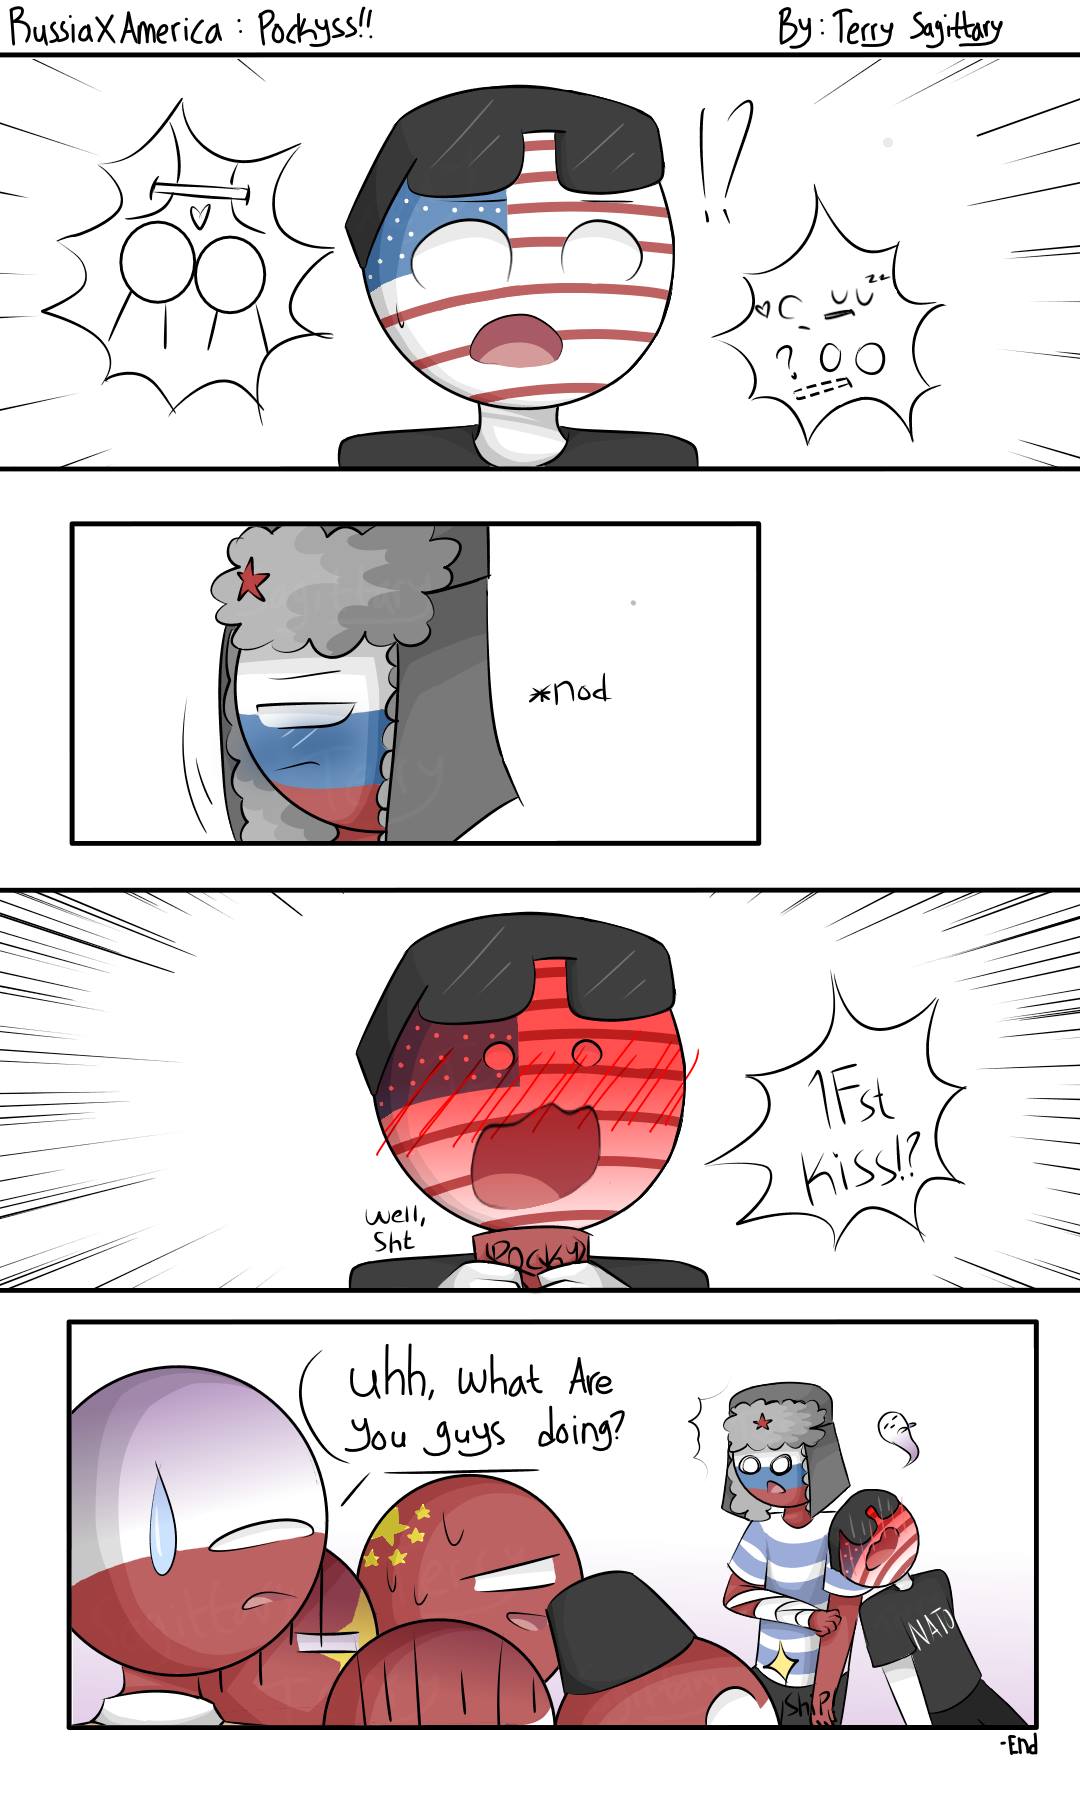 Russia X America By Terry Sagittary Countryhumans 